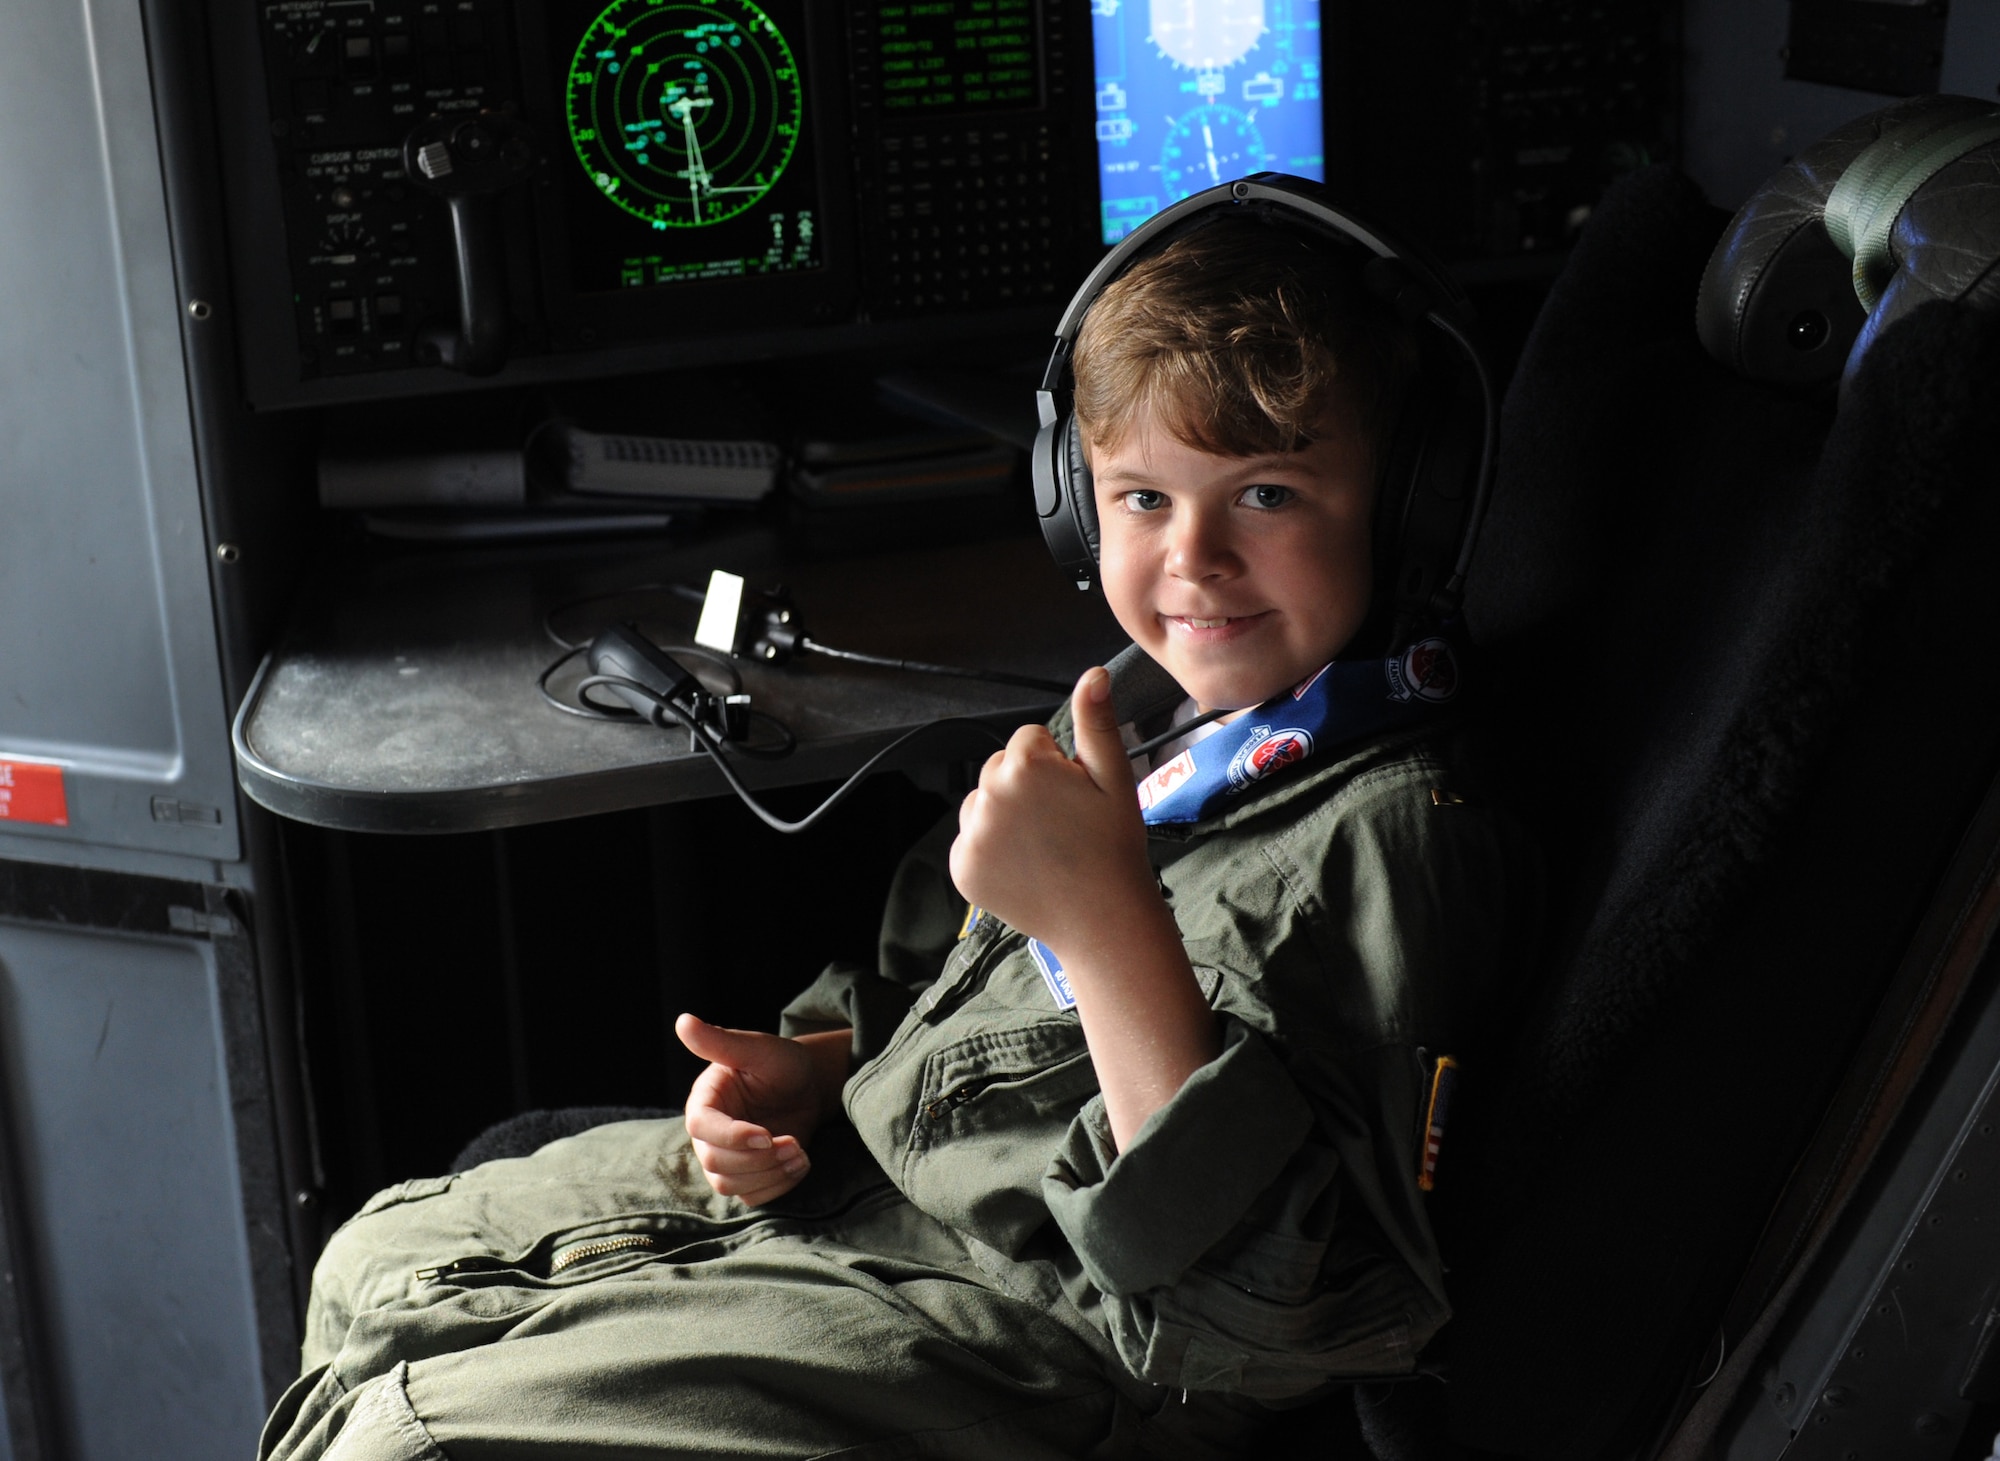 Jon Bryant “JB” Orso sits aboard a WC-130J Super Hercules during the 403rd Wing’s first Pilot for a Day event April 26, 2016, Keesler Air Force Base, Miss. Orso, who served as an honorary Air Force Reserve second lieutenant, is in remission after receiving treatment for Acute Lymphoblastic Leukemia. Pilot for a Day is a community outreach program for children who live with a chronic or life-threatening disease or illness. (U.S. Air Force photo by Kemberly Groue)